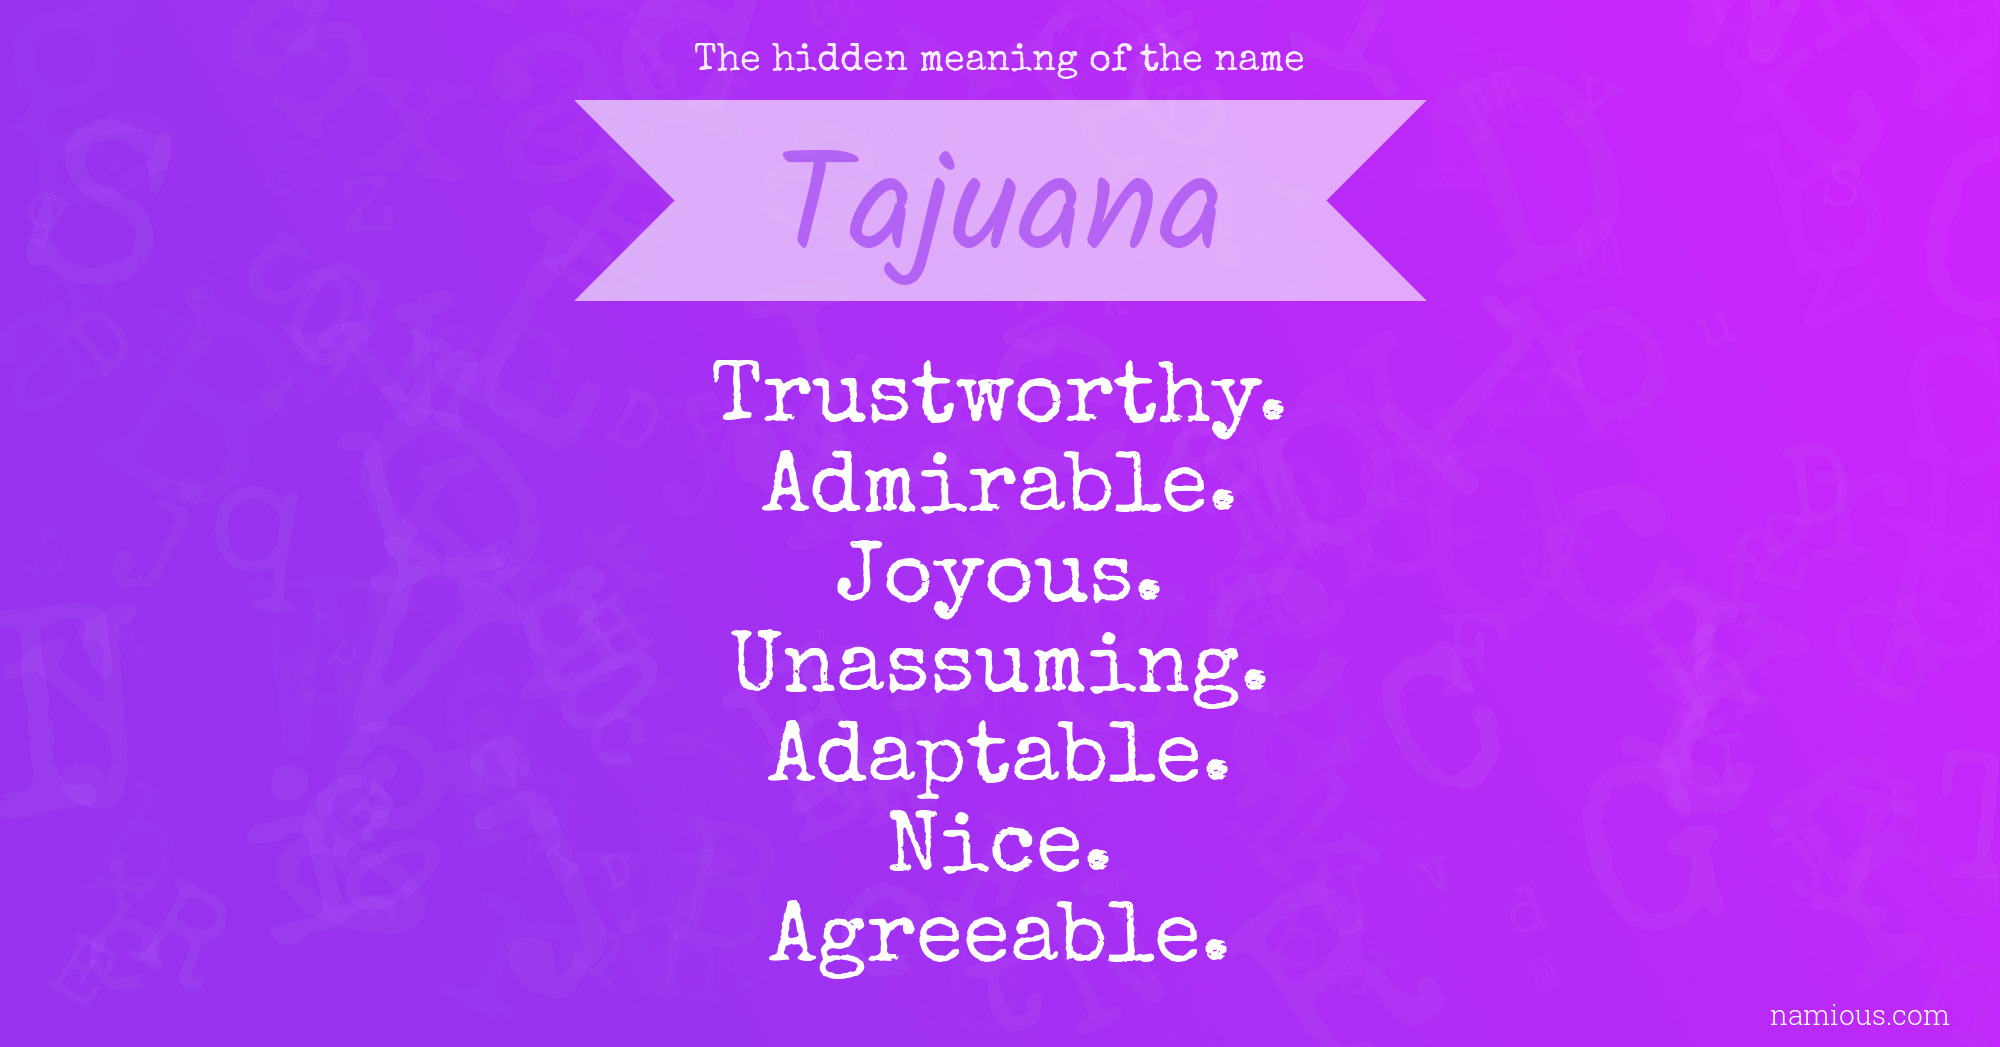 The hidden meaning of the name Tajuana